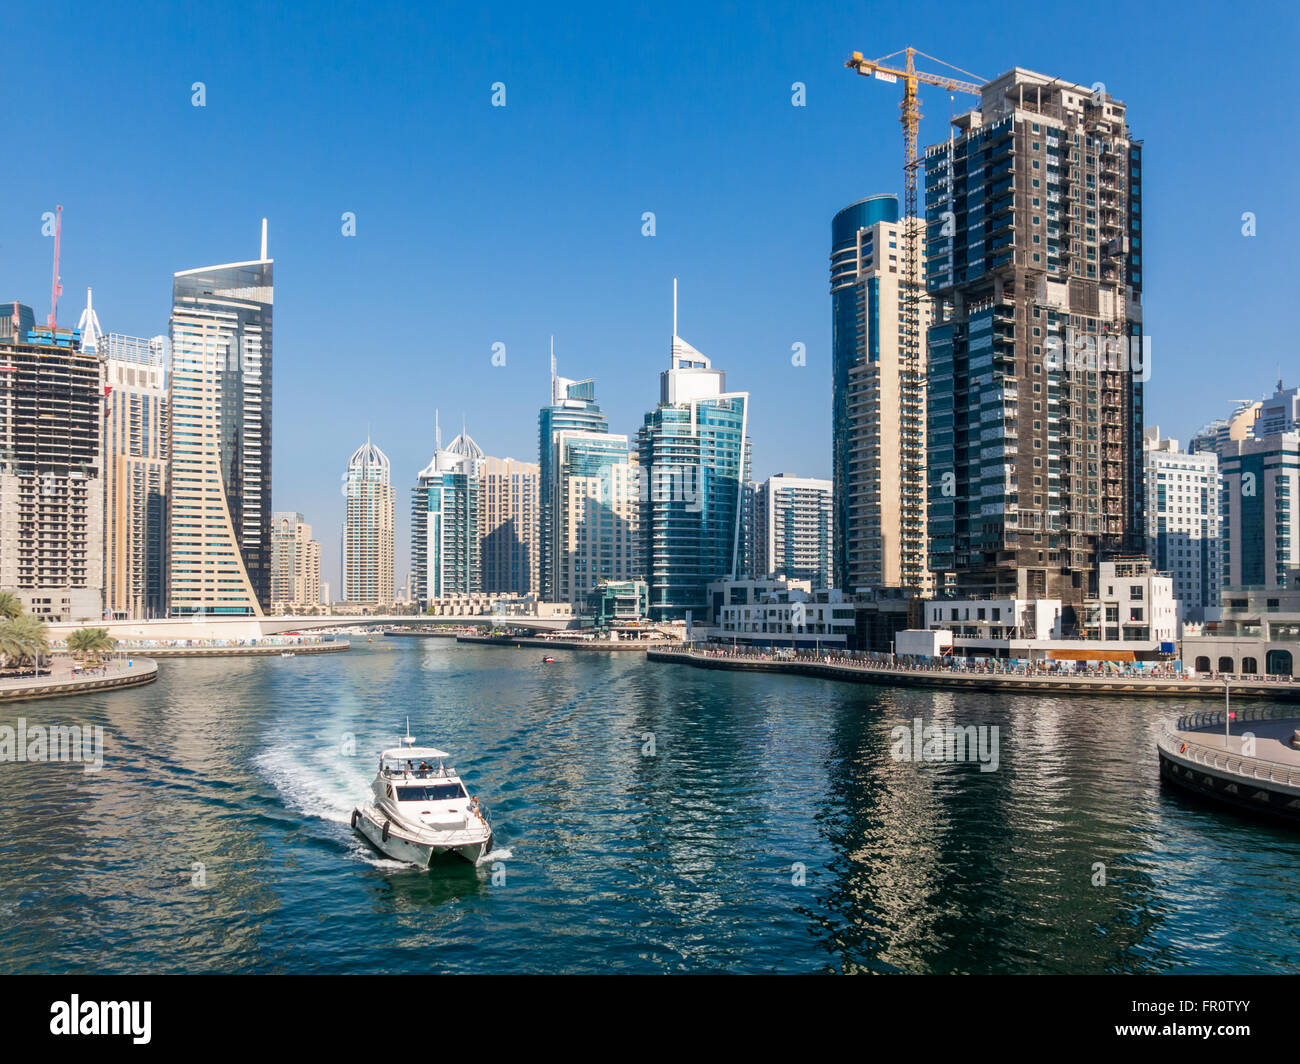 Highrise buildings and boat cruising in the Marina district of Dubai, United Arab Emirates Stock Photo